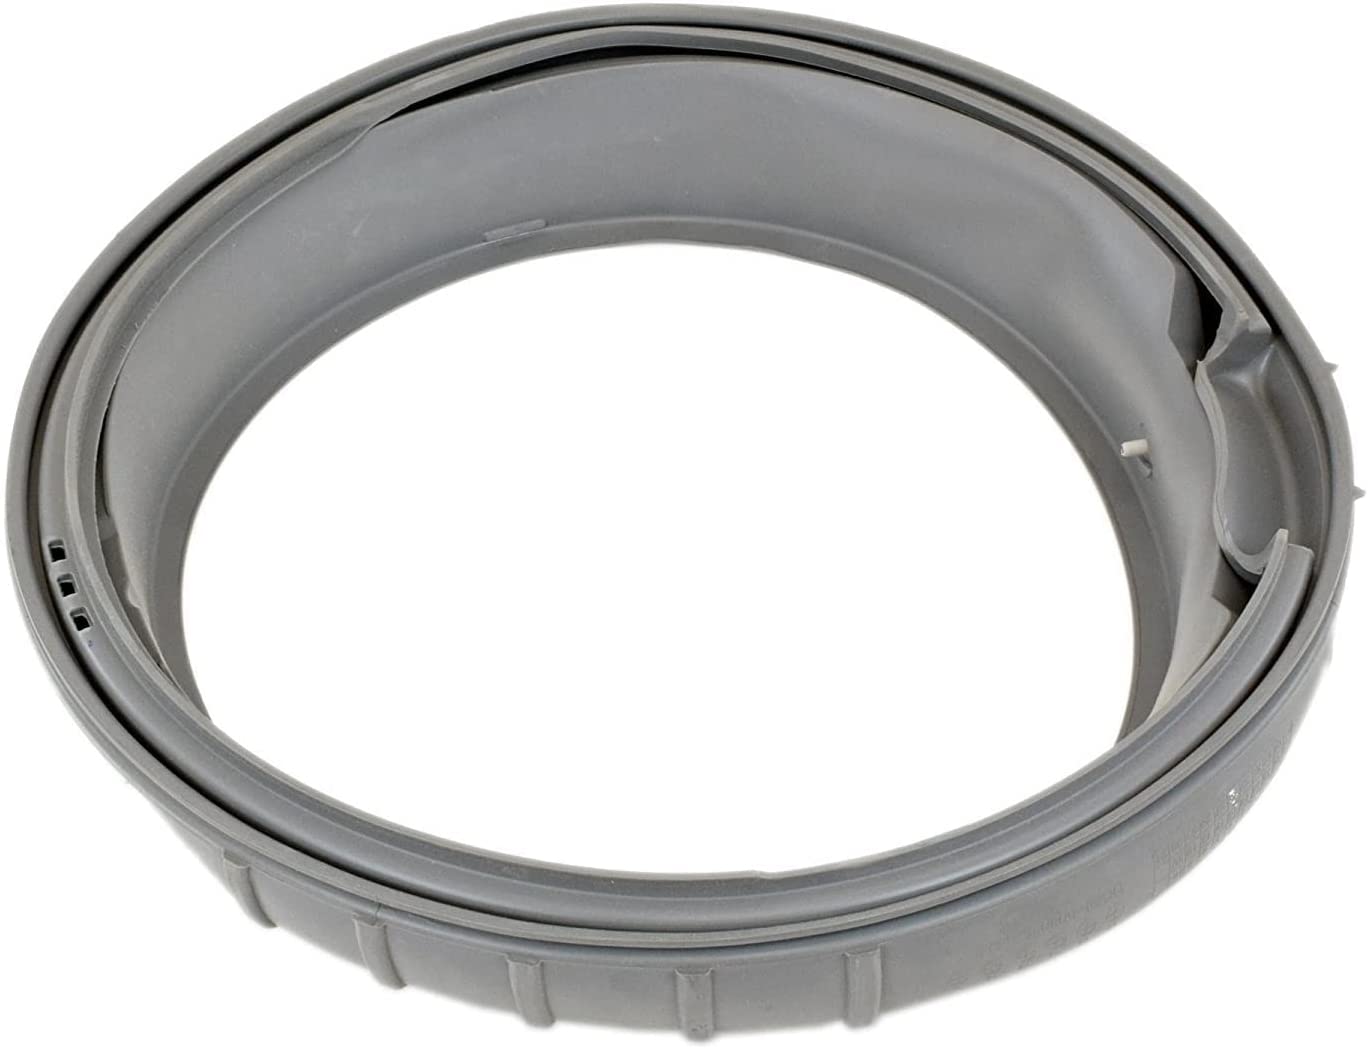 DC64-00802A Door Gasket Boot Seal Diaphragm Compatible with Samsung Washer - 34001302